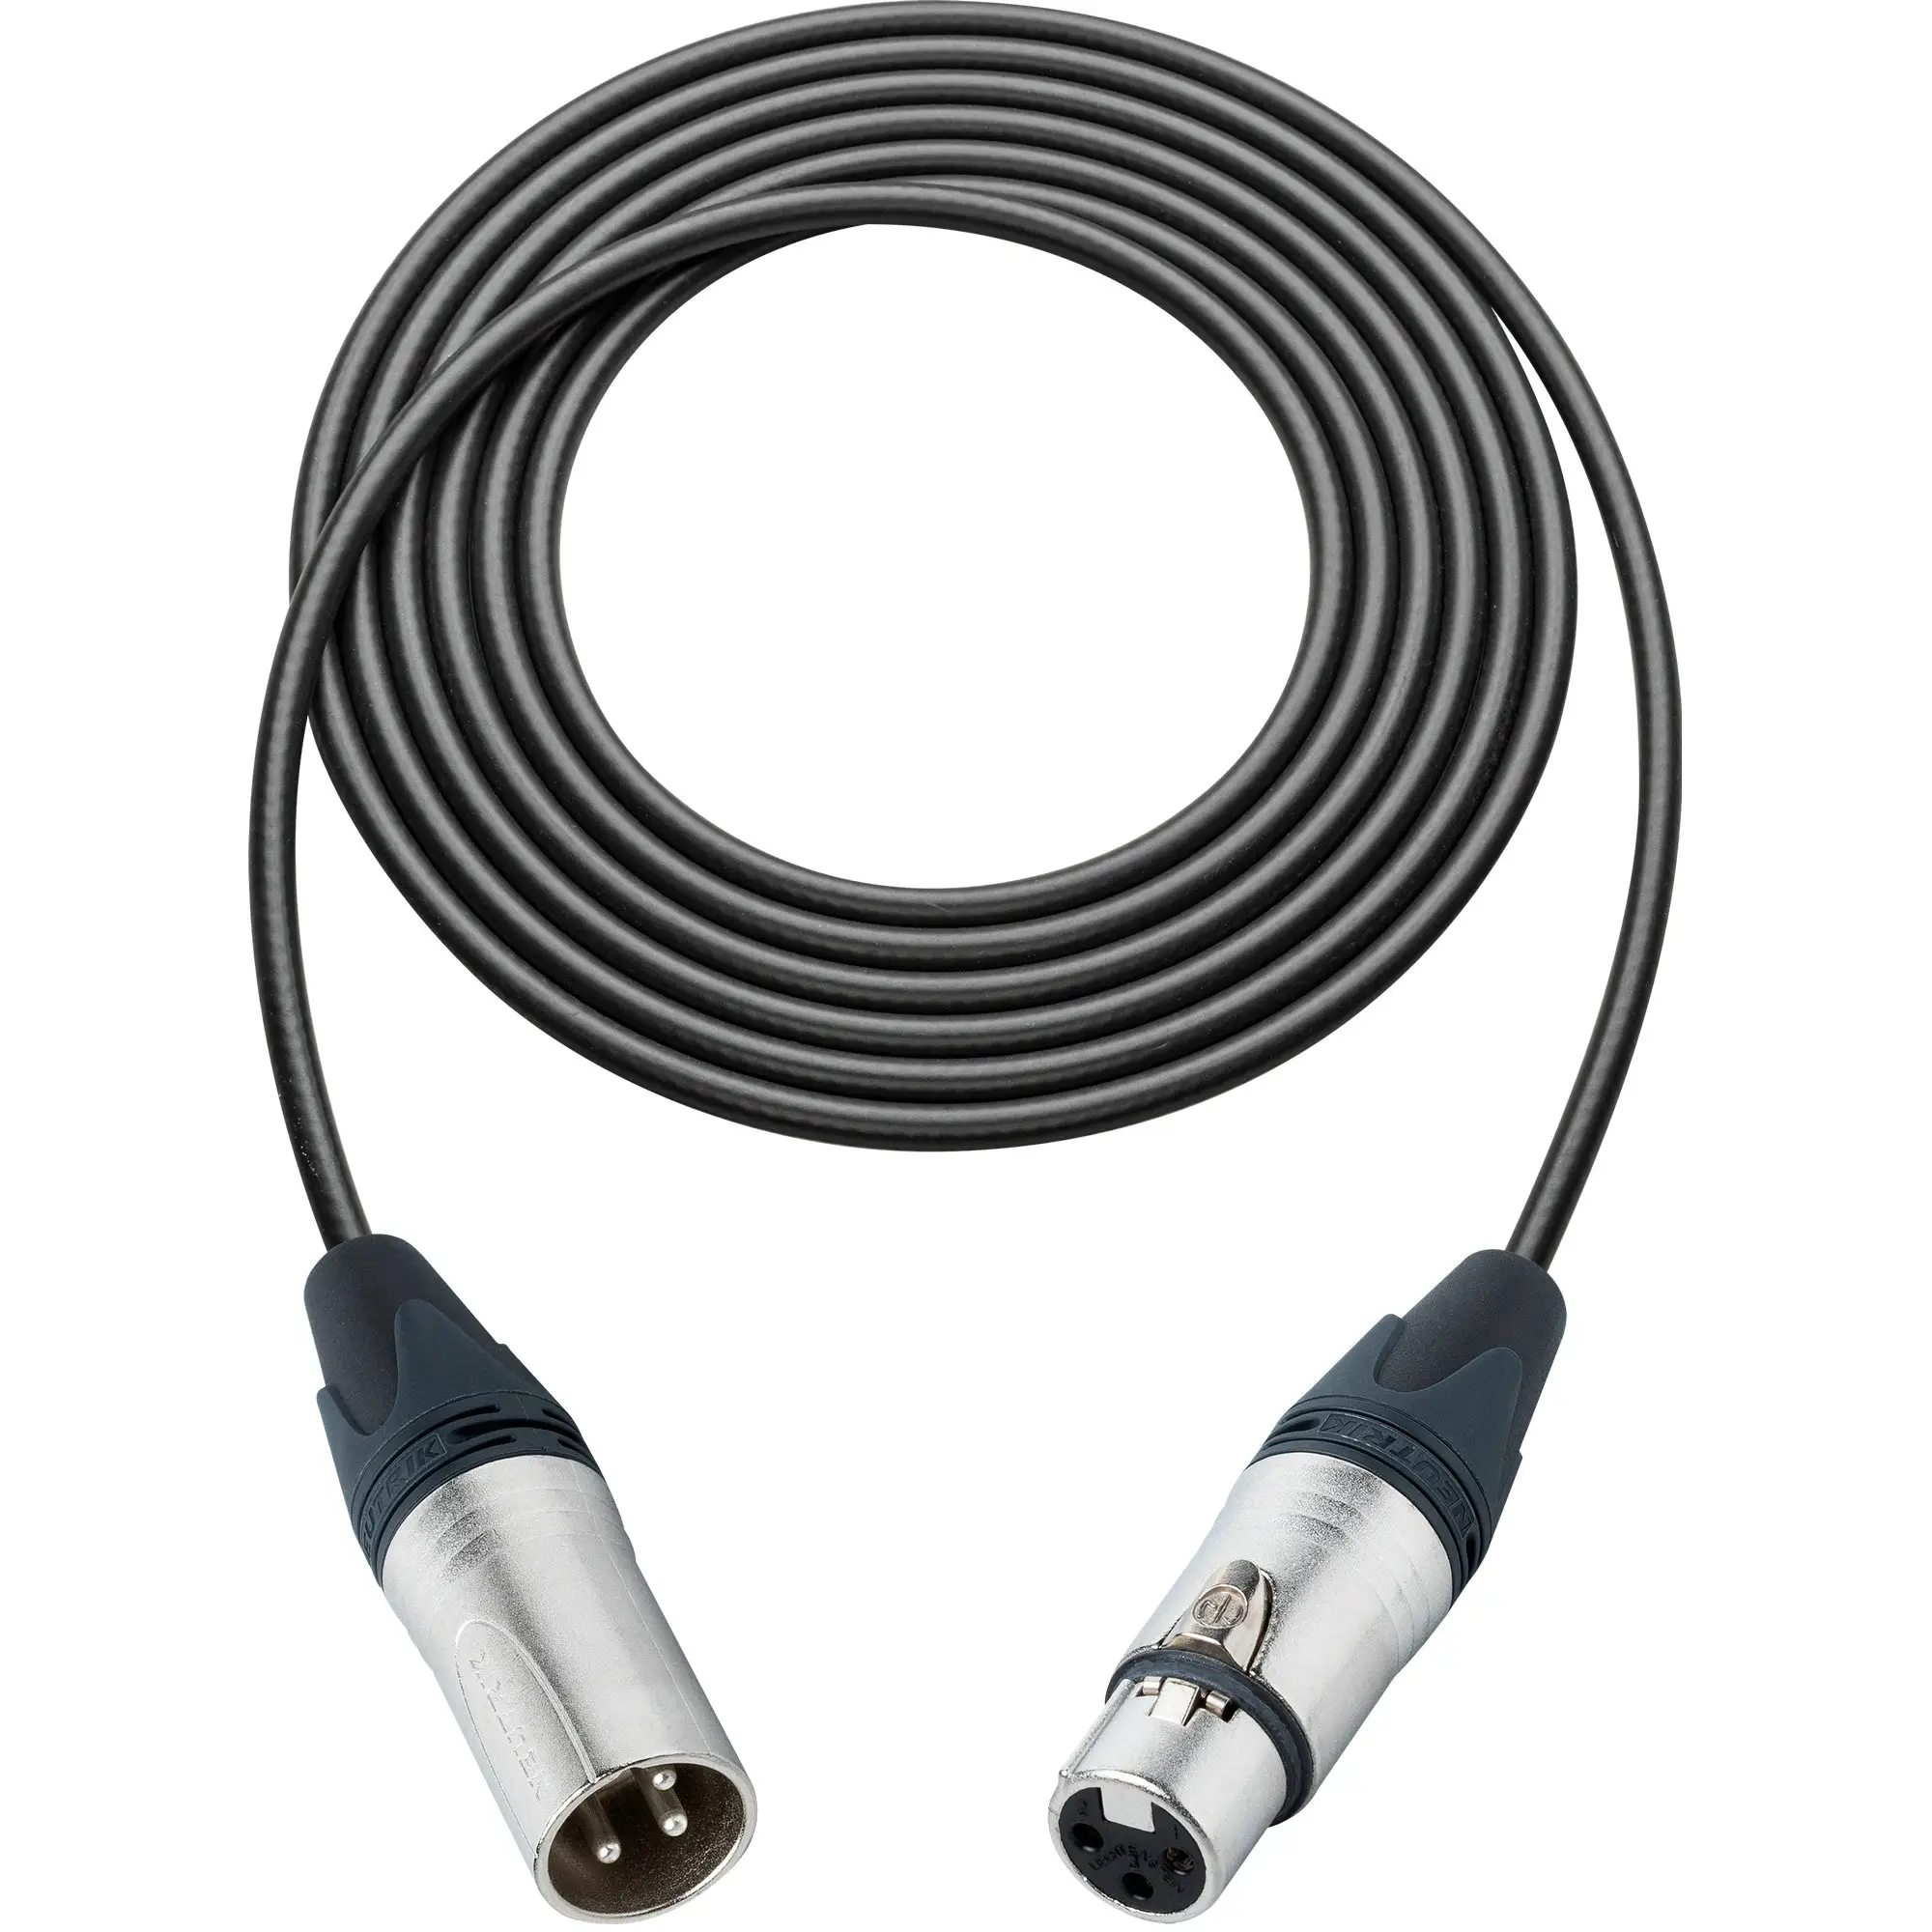 HOT sale OEM professional 5pin Speaker audio XLR cable 7.0MM 20FT male to female xlr microphone cable wire